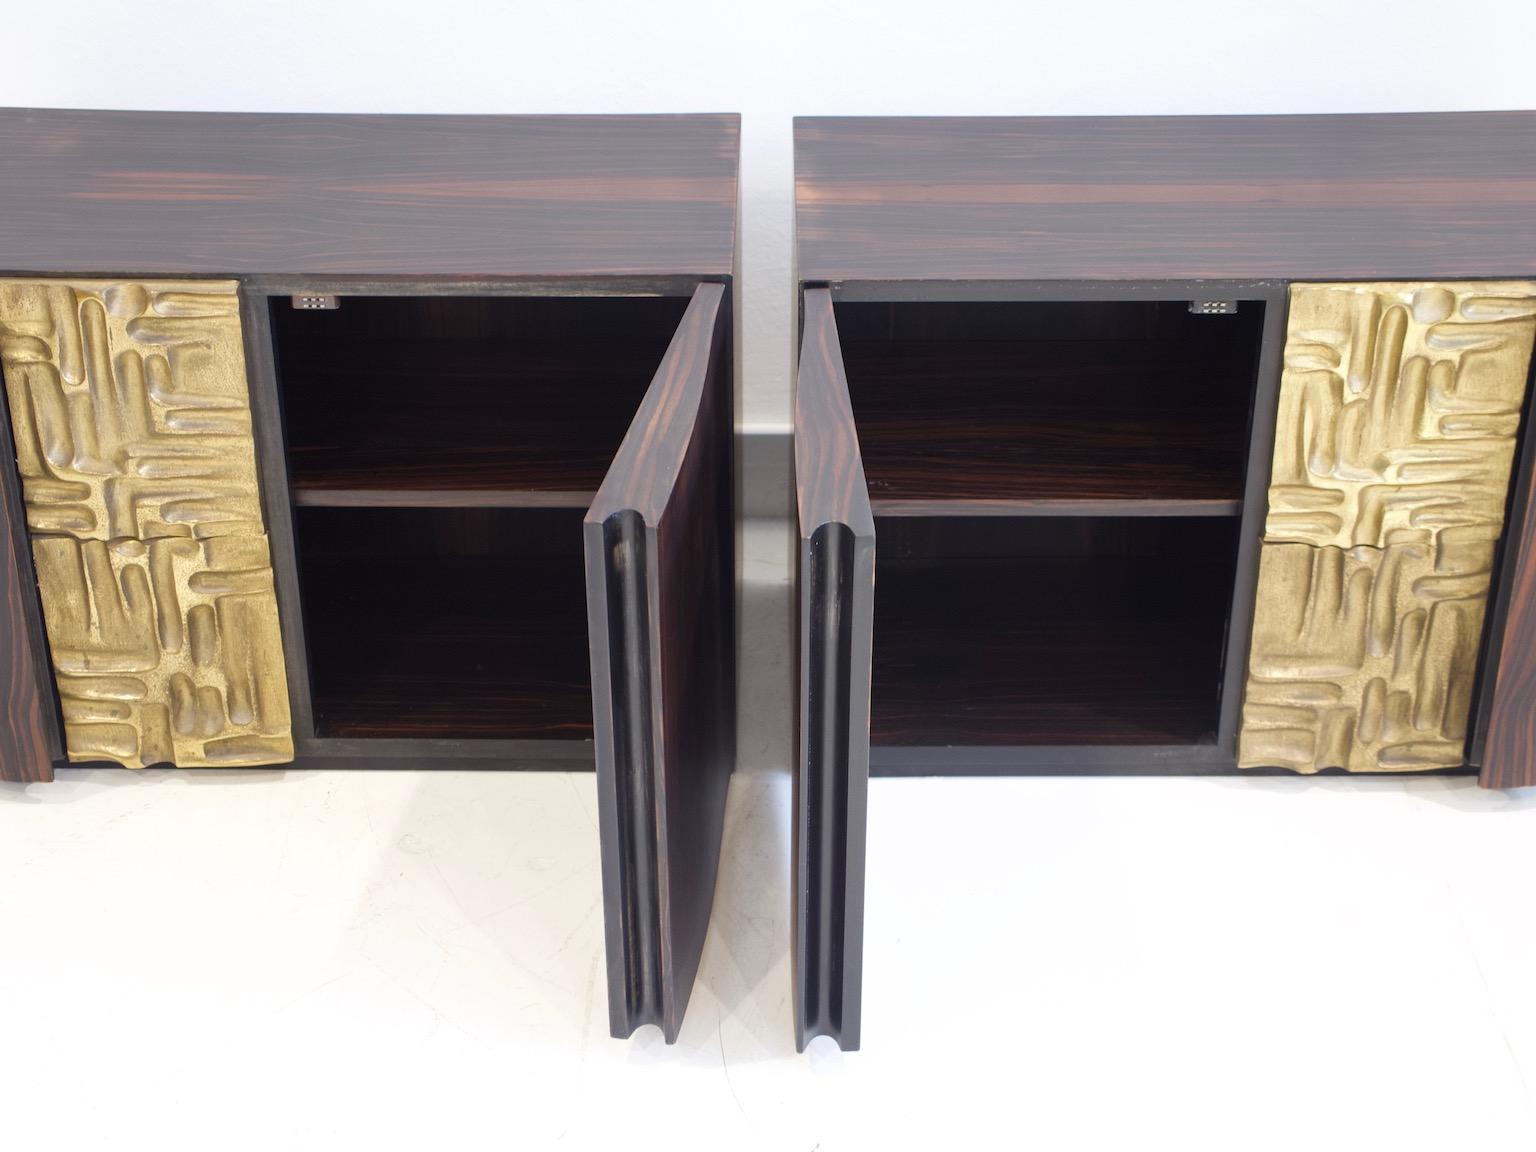 20th Century Pair of Macassar Ebony Credenzas with Bronze Details by Luciano Frigerio